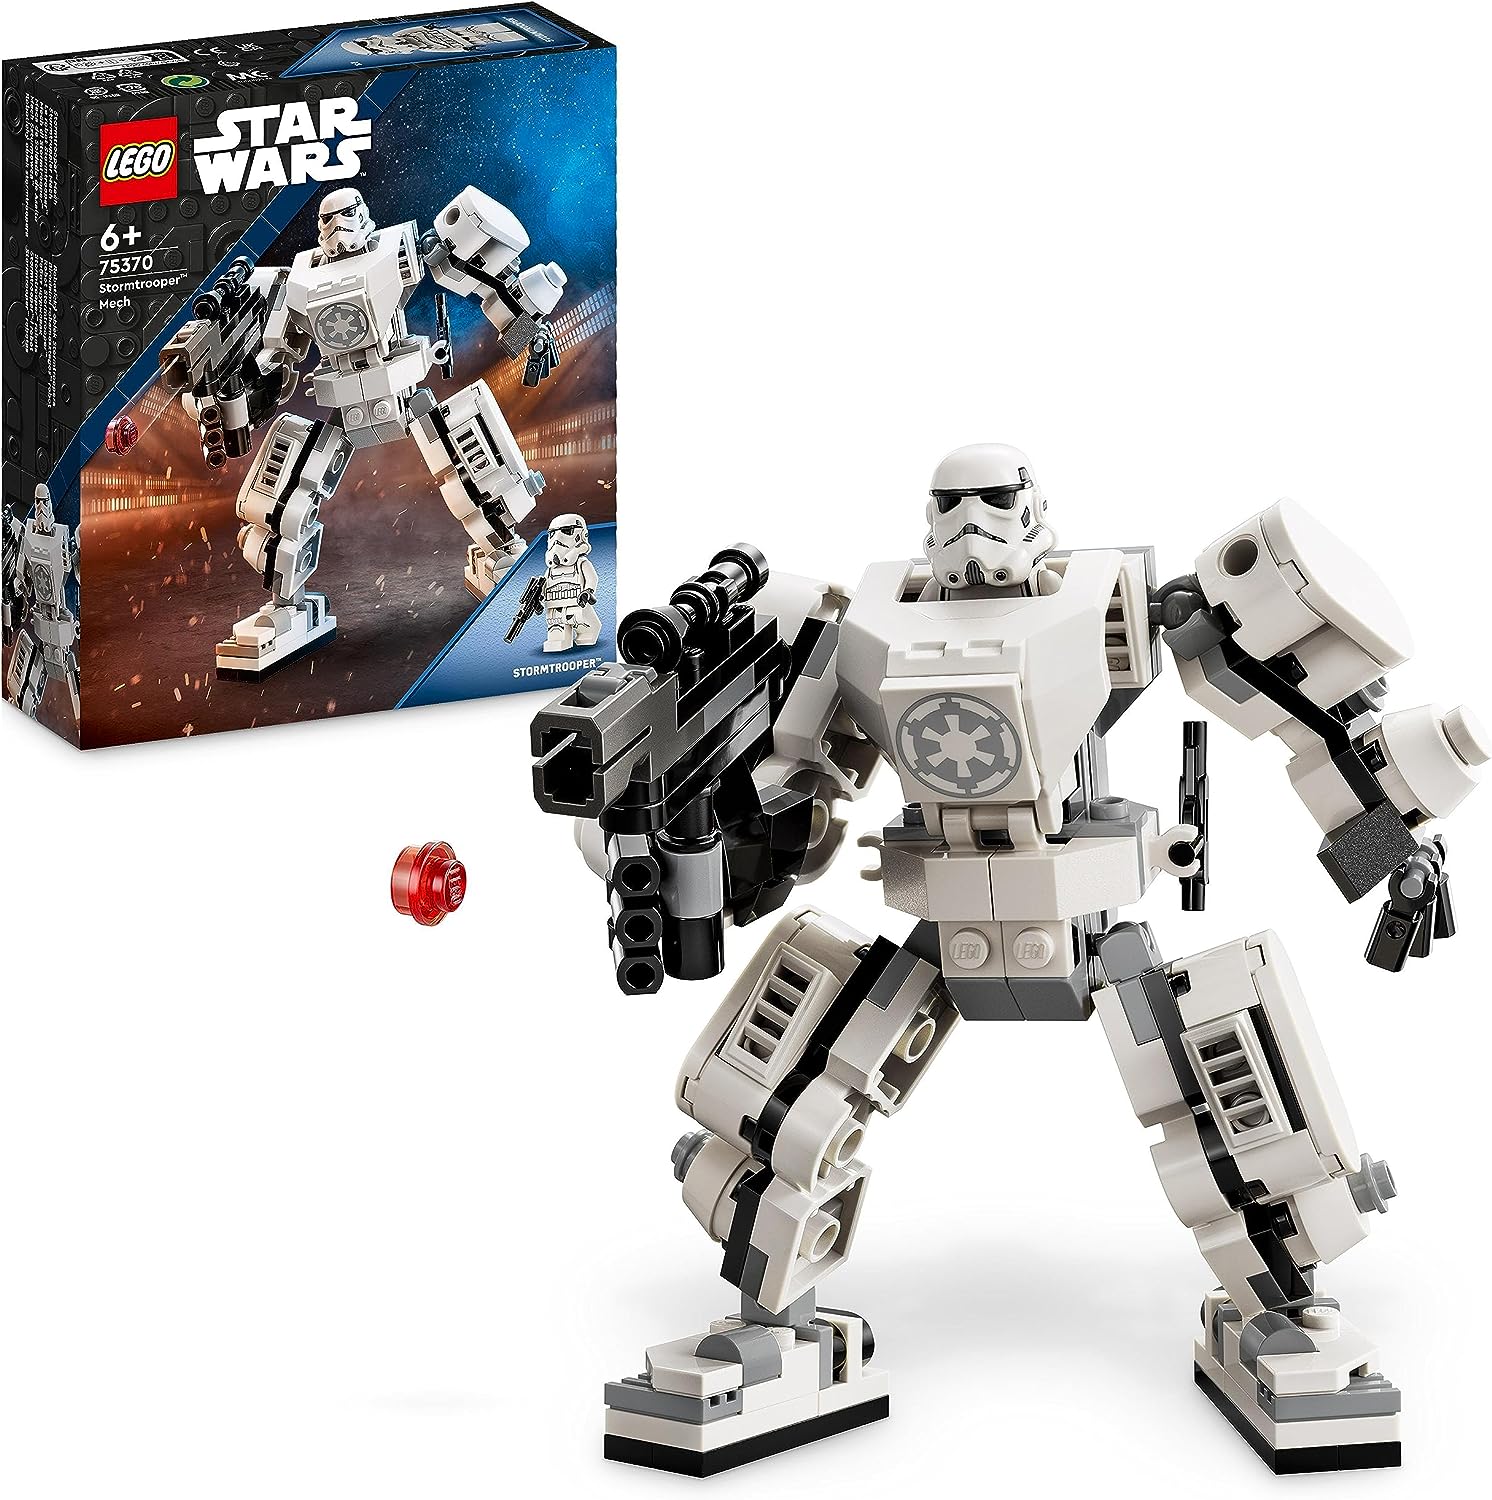 LEGO 75370 Star Wars Stormtrooper Mech Set, Buildable Action Figure Model with Joint Parts, Mini Figure Cockpit and Large Stud Shooter, Collectable Toy for Children from 6 Years